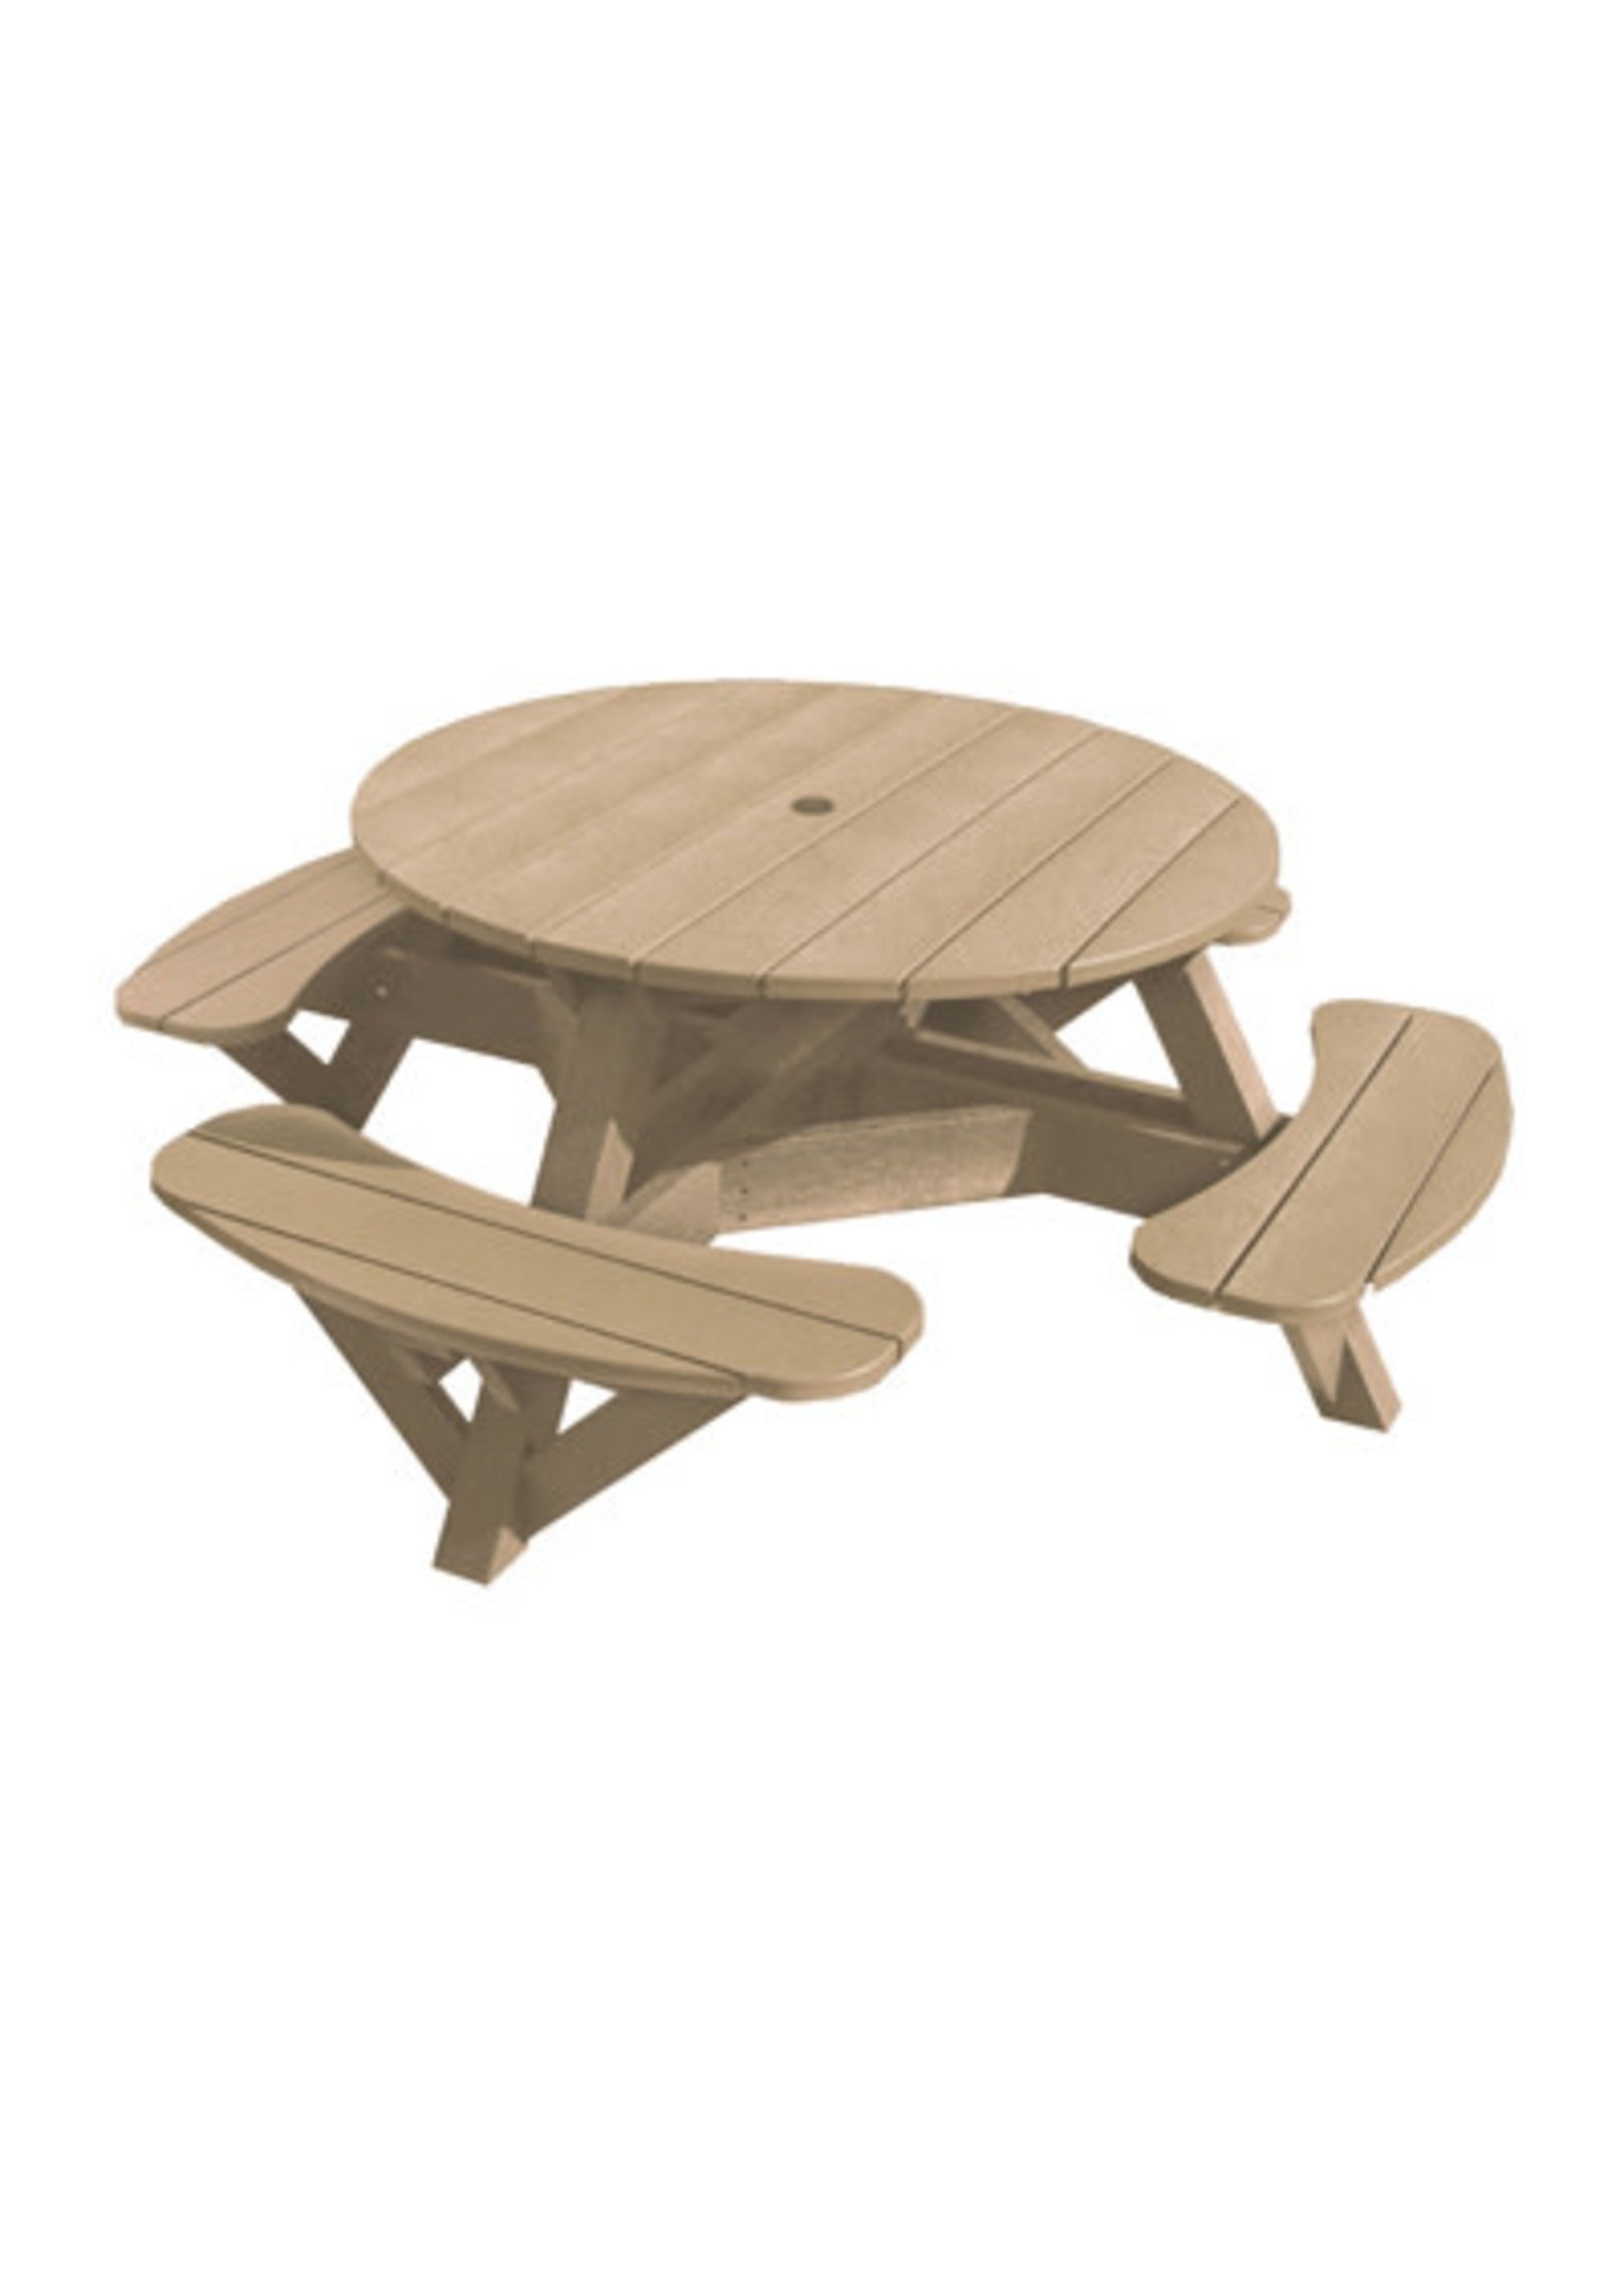 C.R. Plastic Products Round 51" Picnic Table, Generation Line,